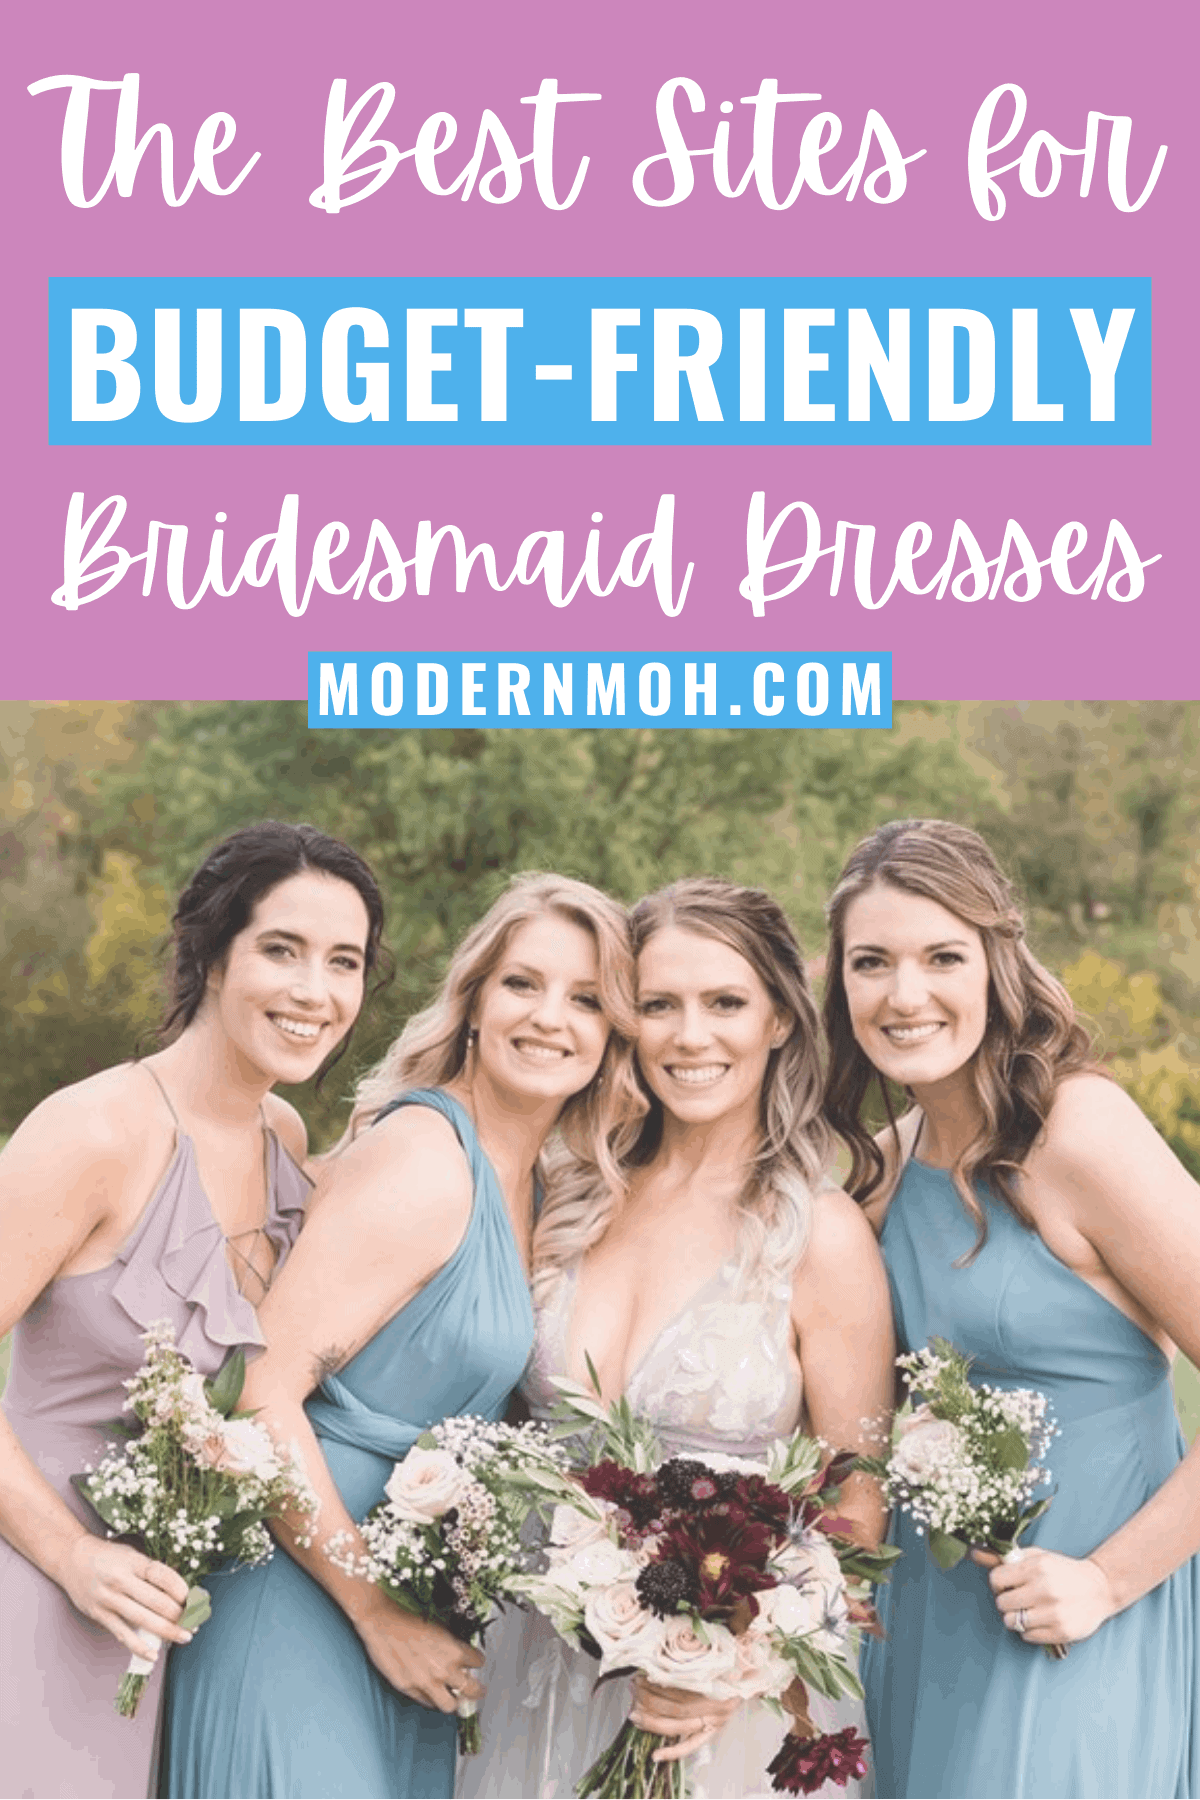 4 Places to Buy Affordable Bridesmaid Dresses Online